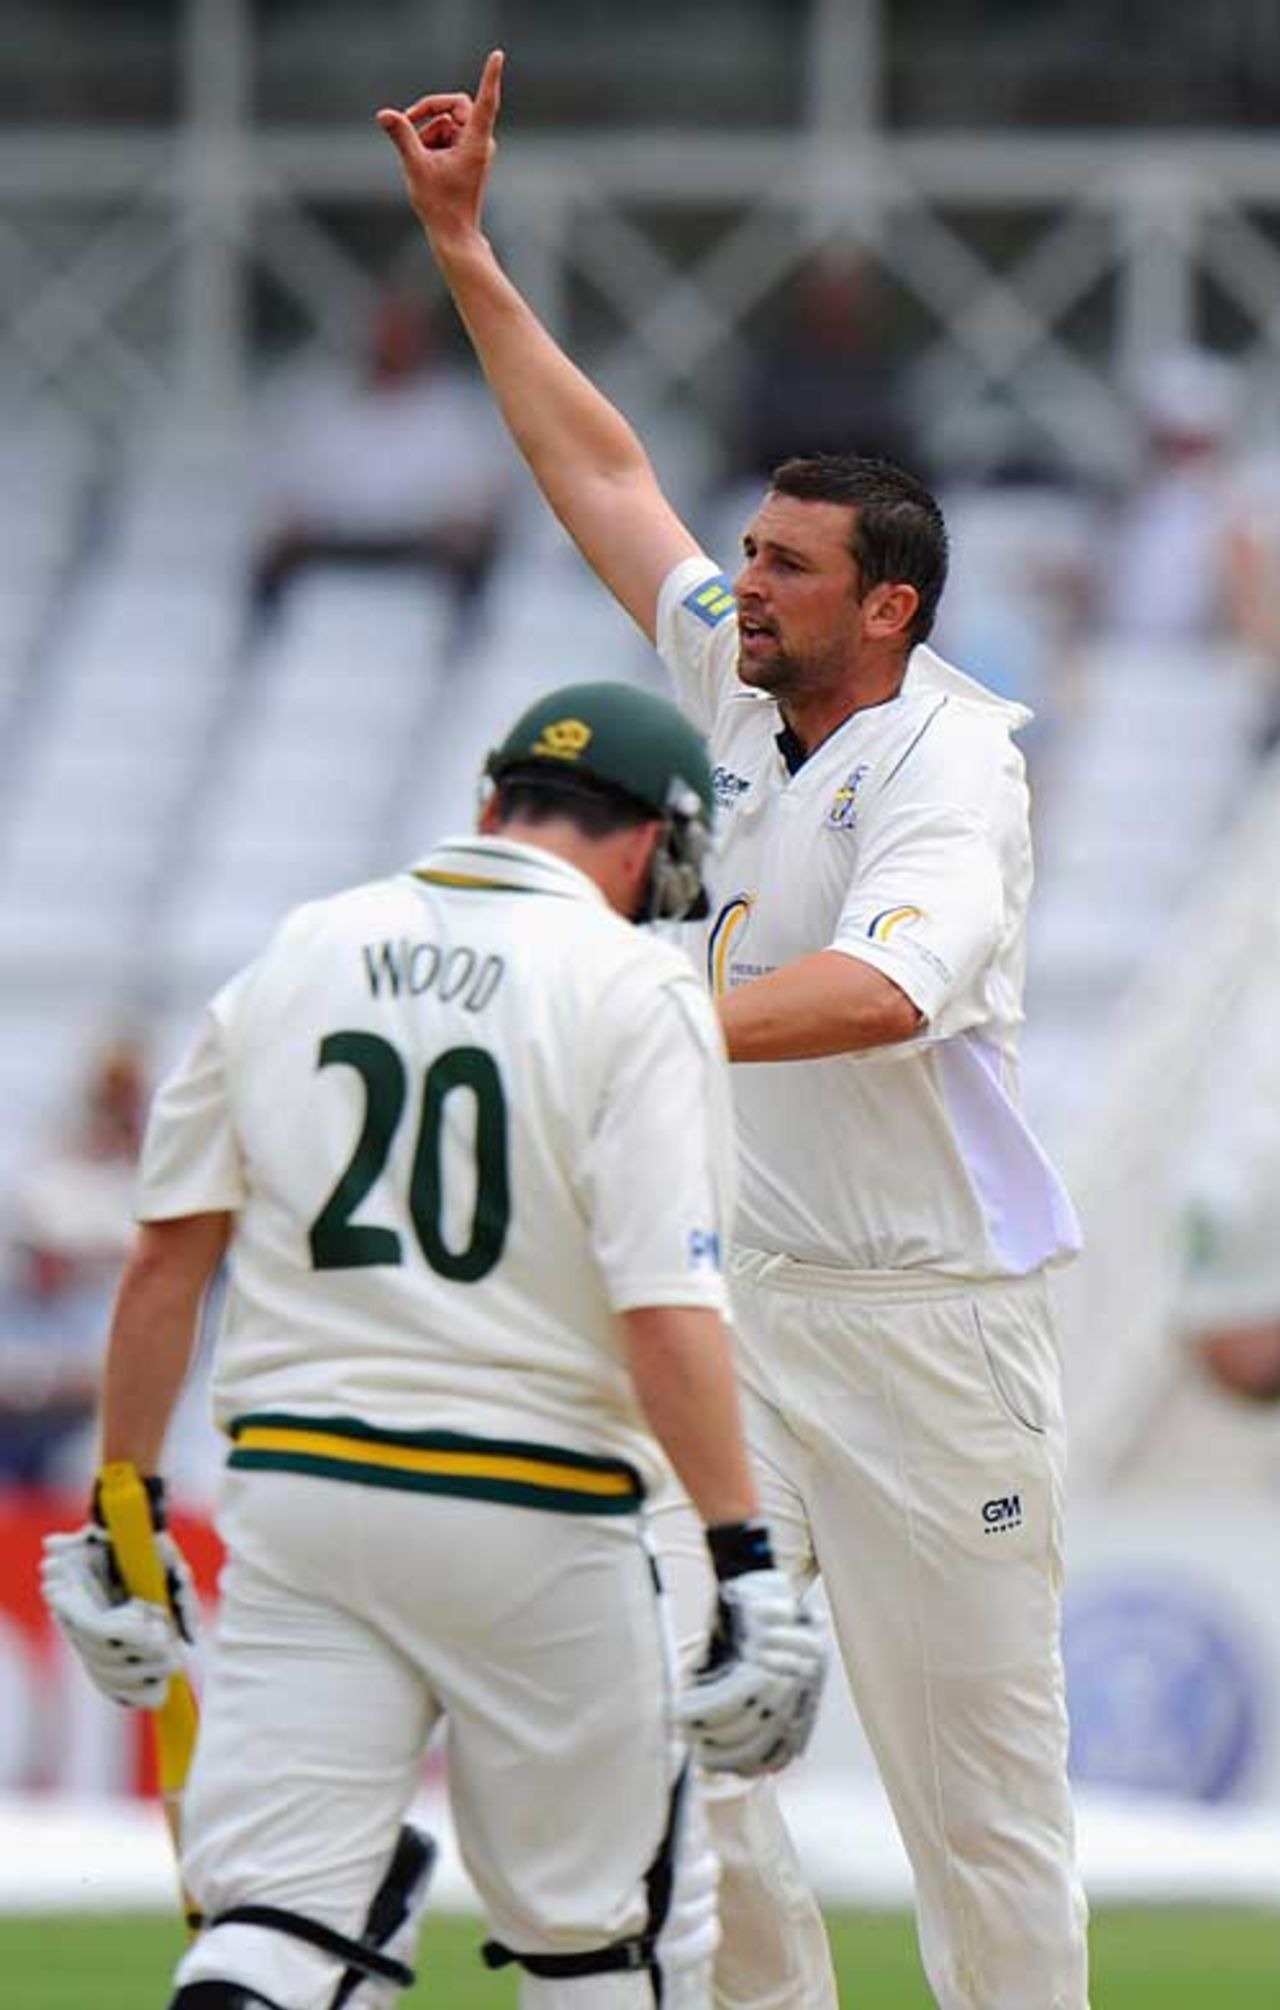 Steve Harmison removed Matthew Wood after a quick journey from Lord's, Nottinghamshire v Durham, County Championship, 2nd day, Trent Bridge, July 16, 2009